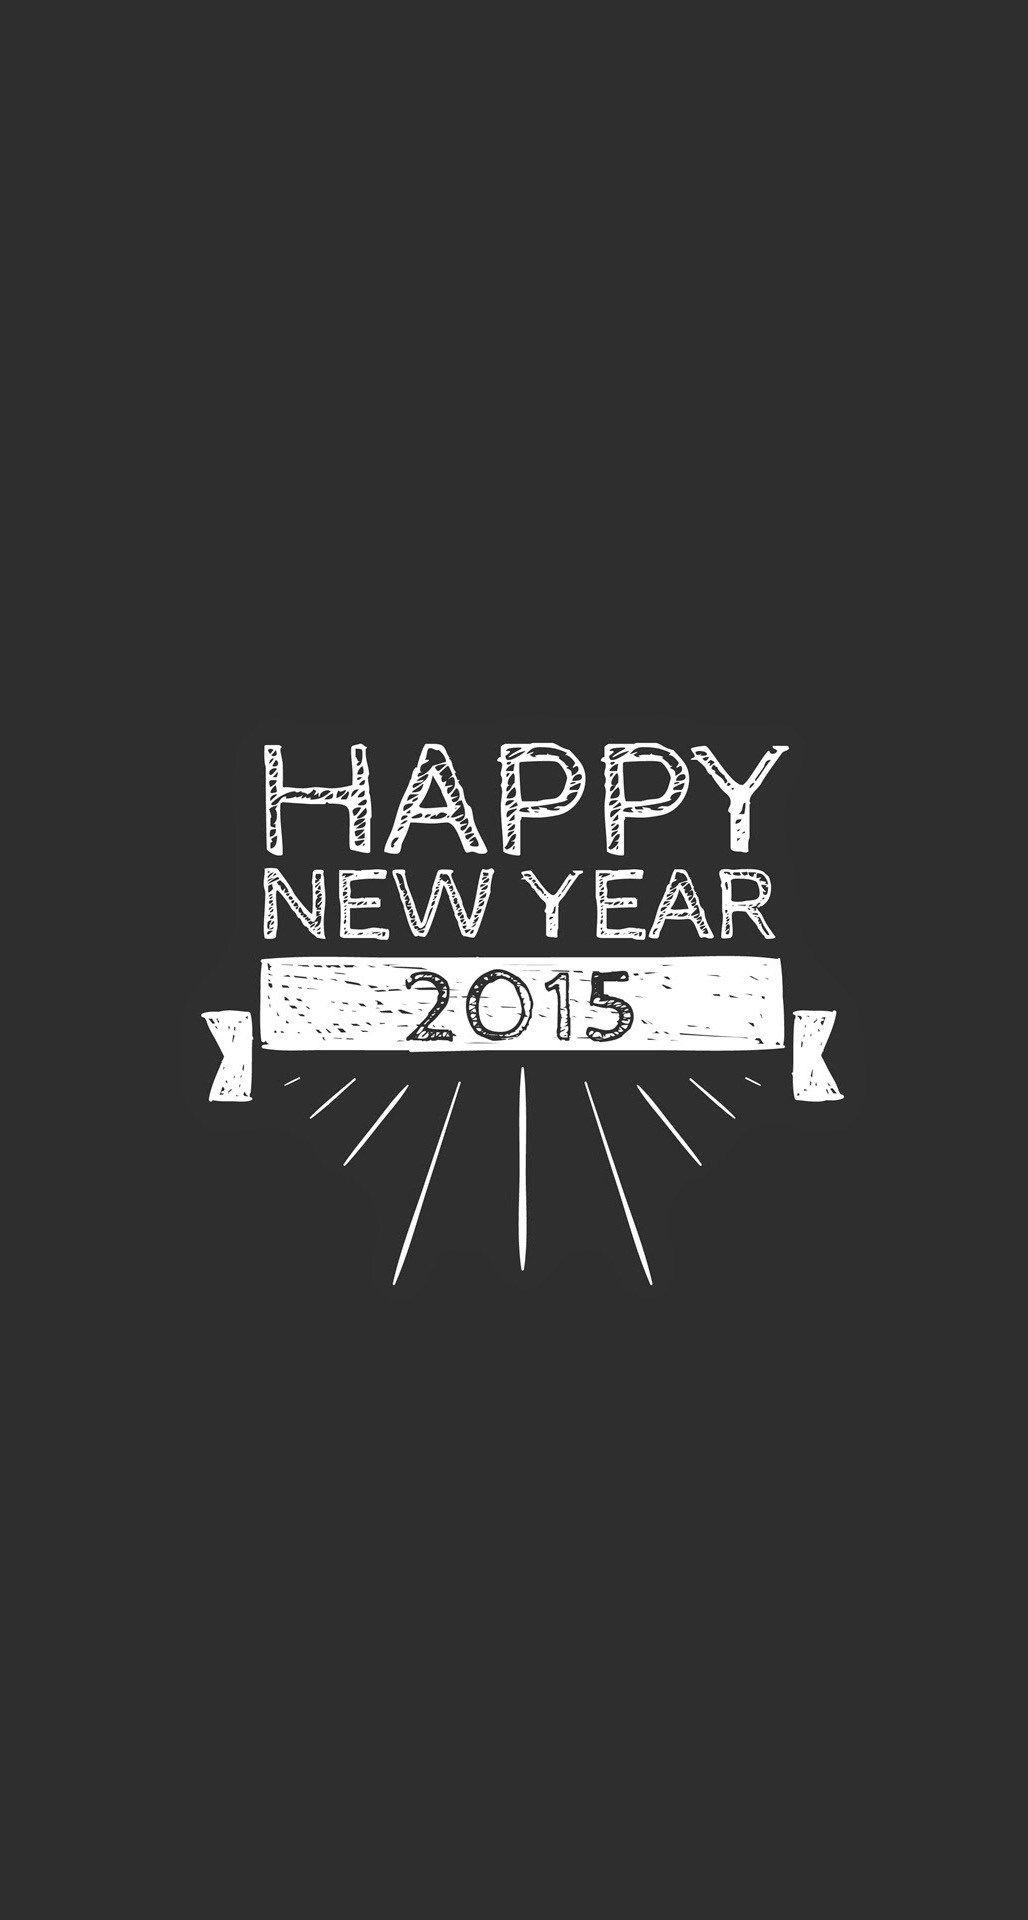 Download Happy New year HD Wallpaper for iPhone. Play Apps For PC